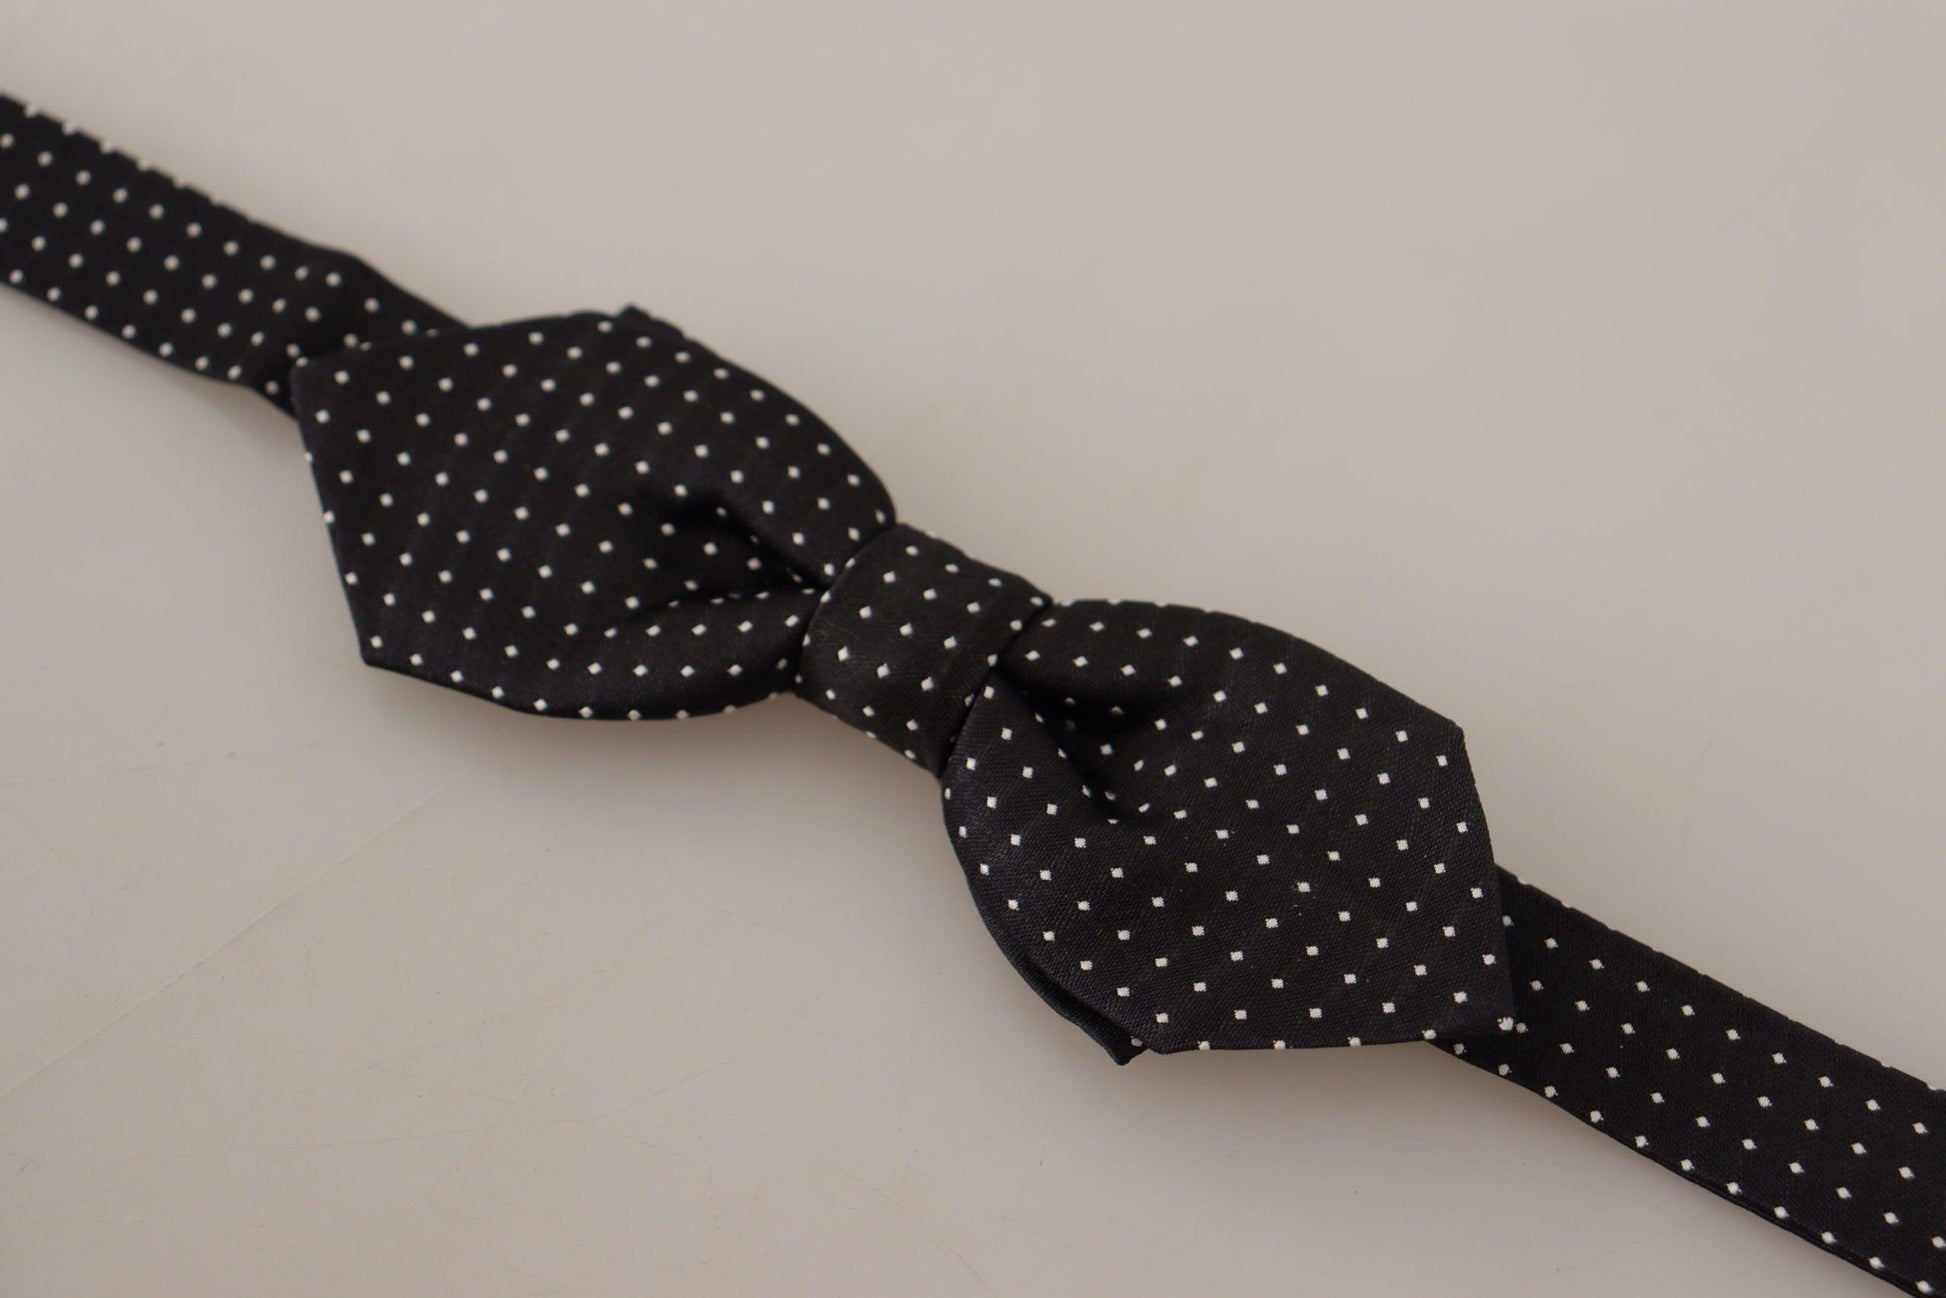 Dolce & Gabbana Black White Polka Dot Adjustable Neck Papillon Bow Tie - Designed by Dolce & Gabbana Available to Buy at a Discounted Price on Moon Behind The Hill Online Designer Discount St